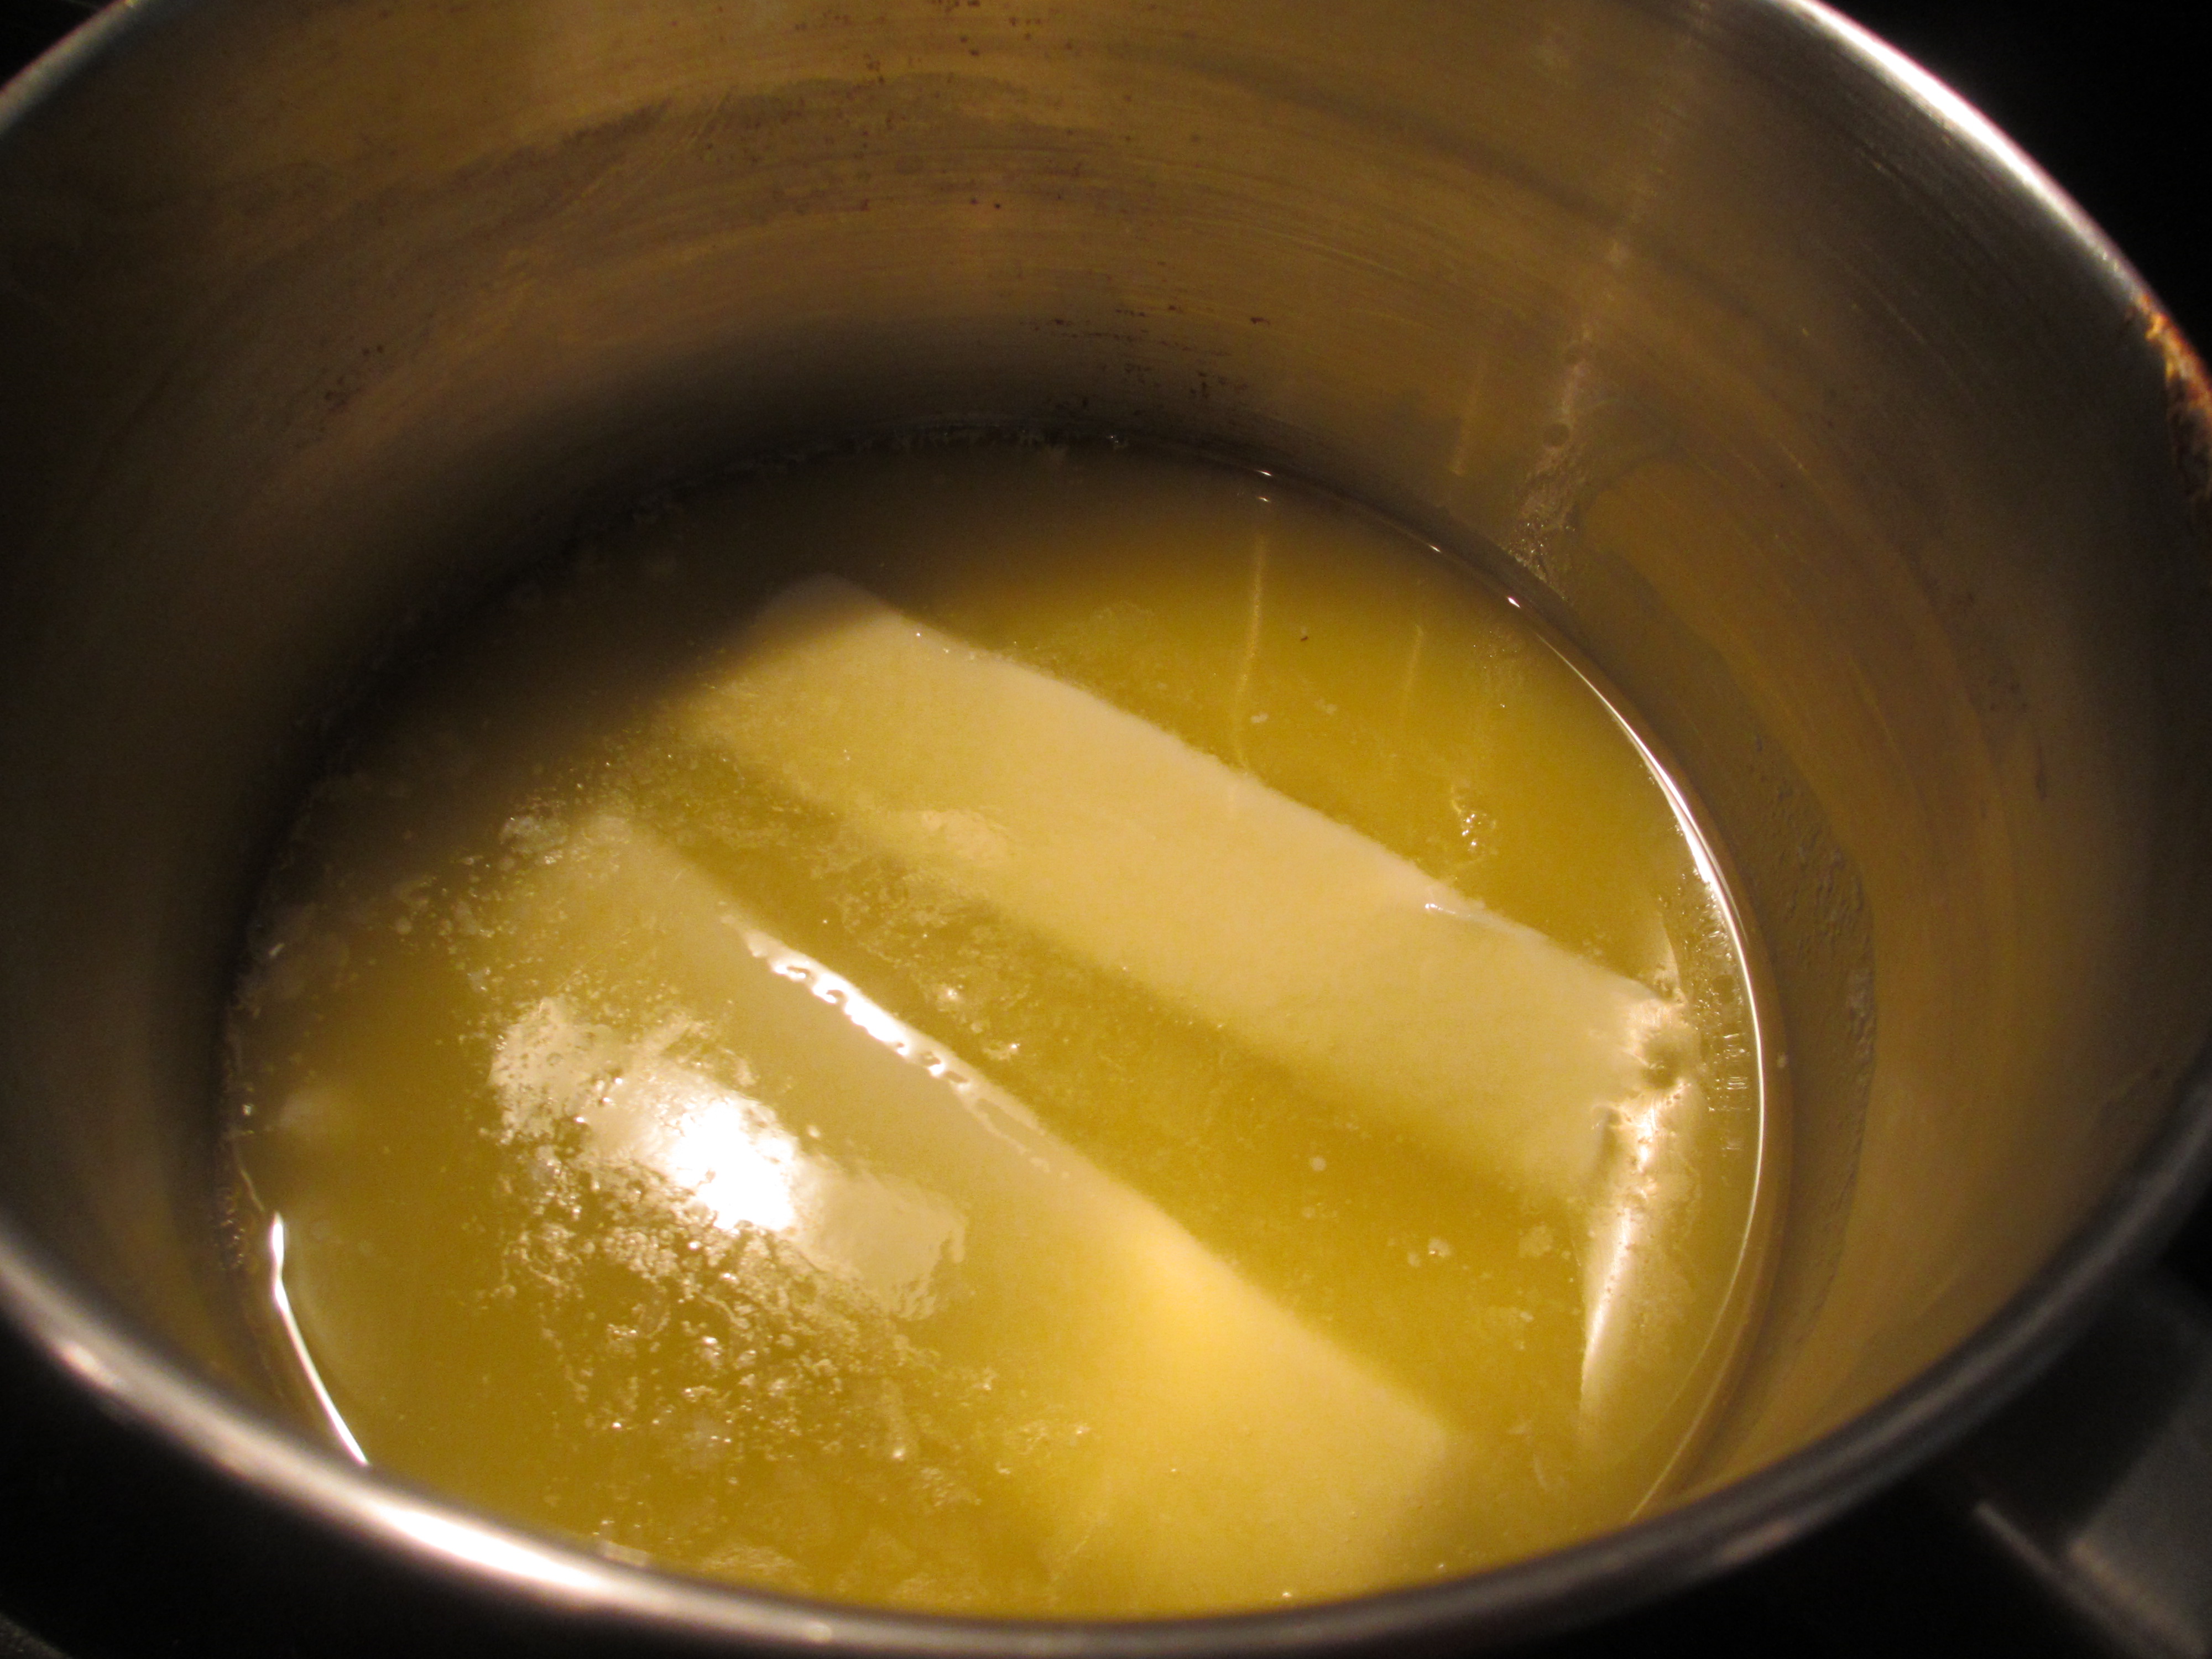 Two sticks of butter melting